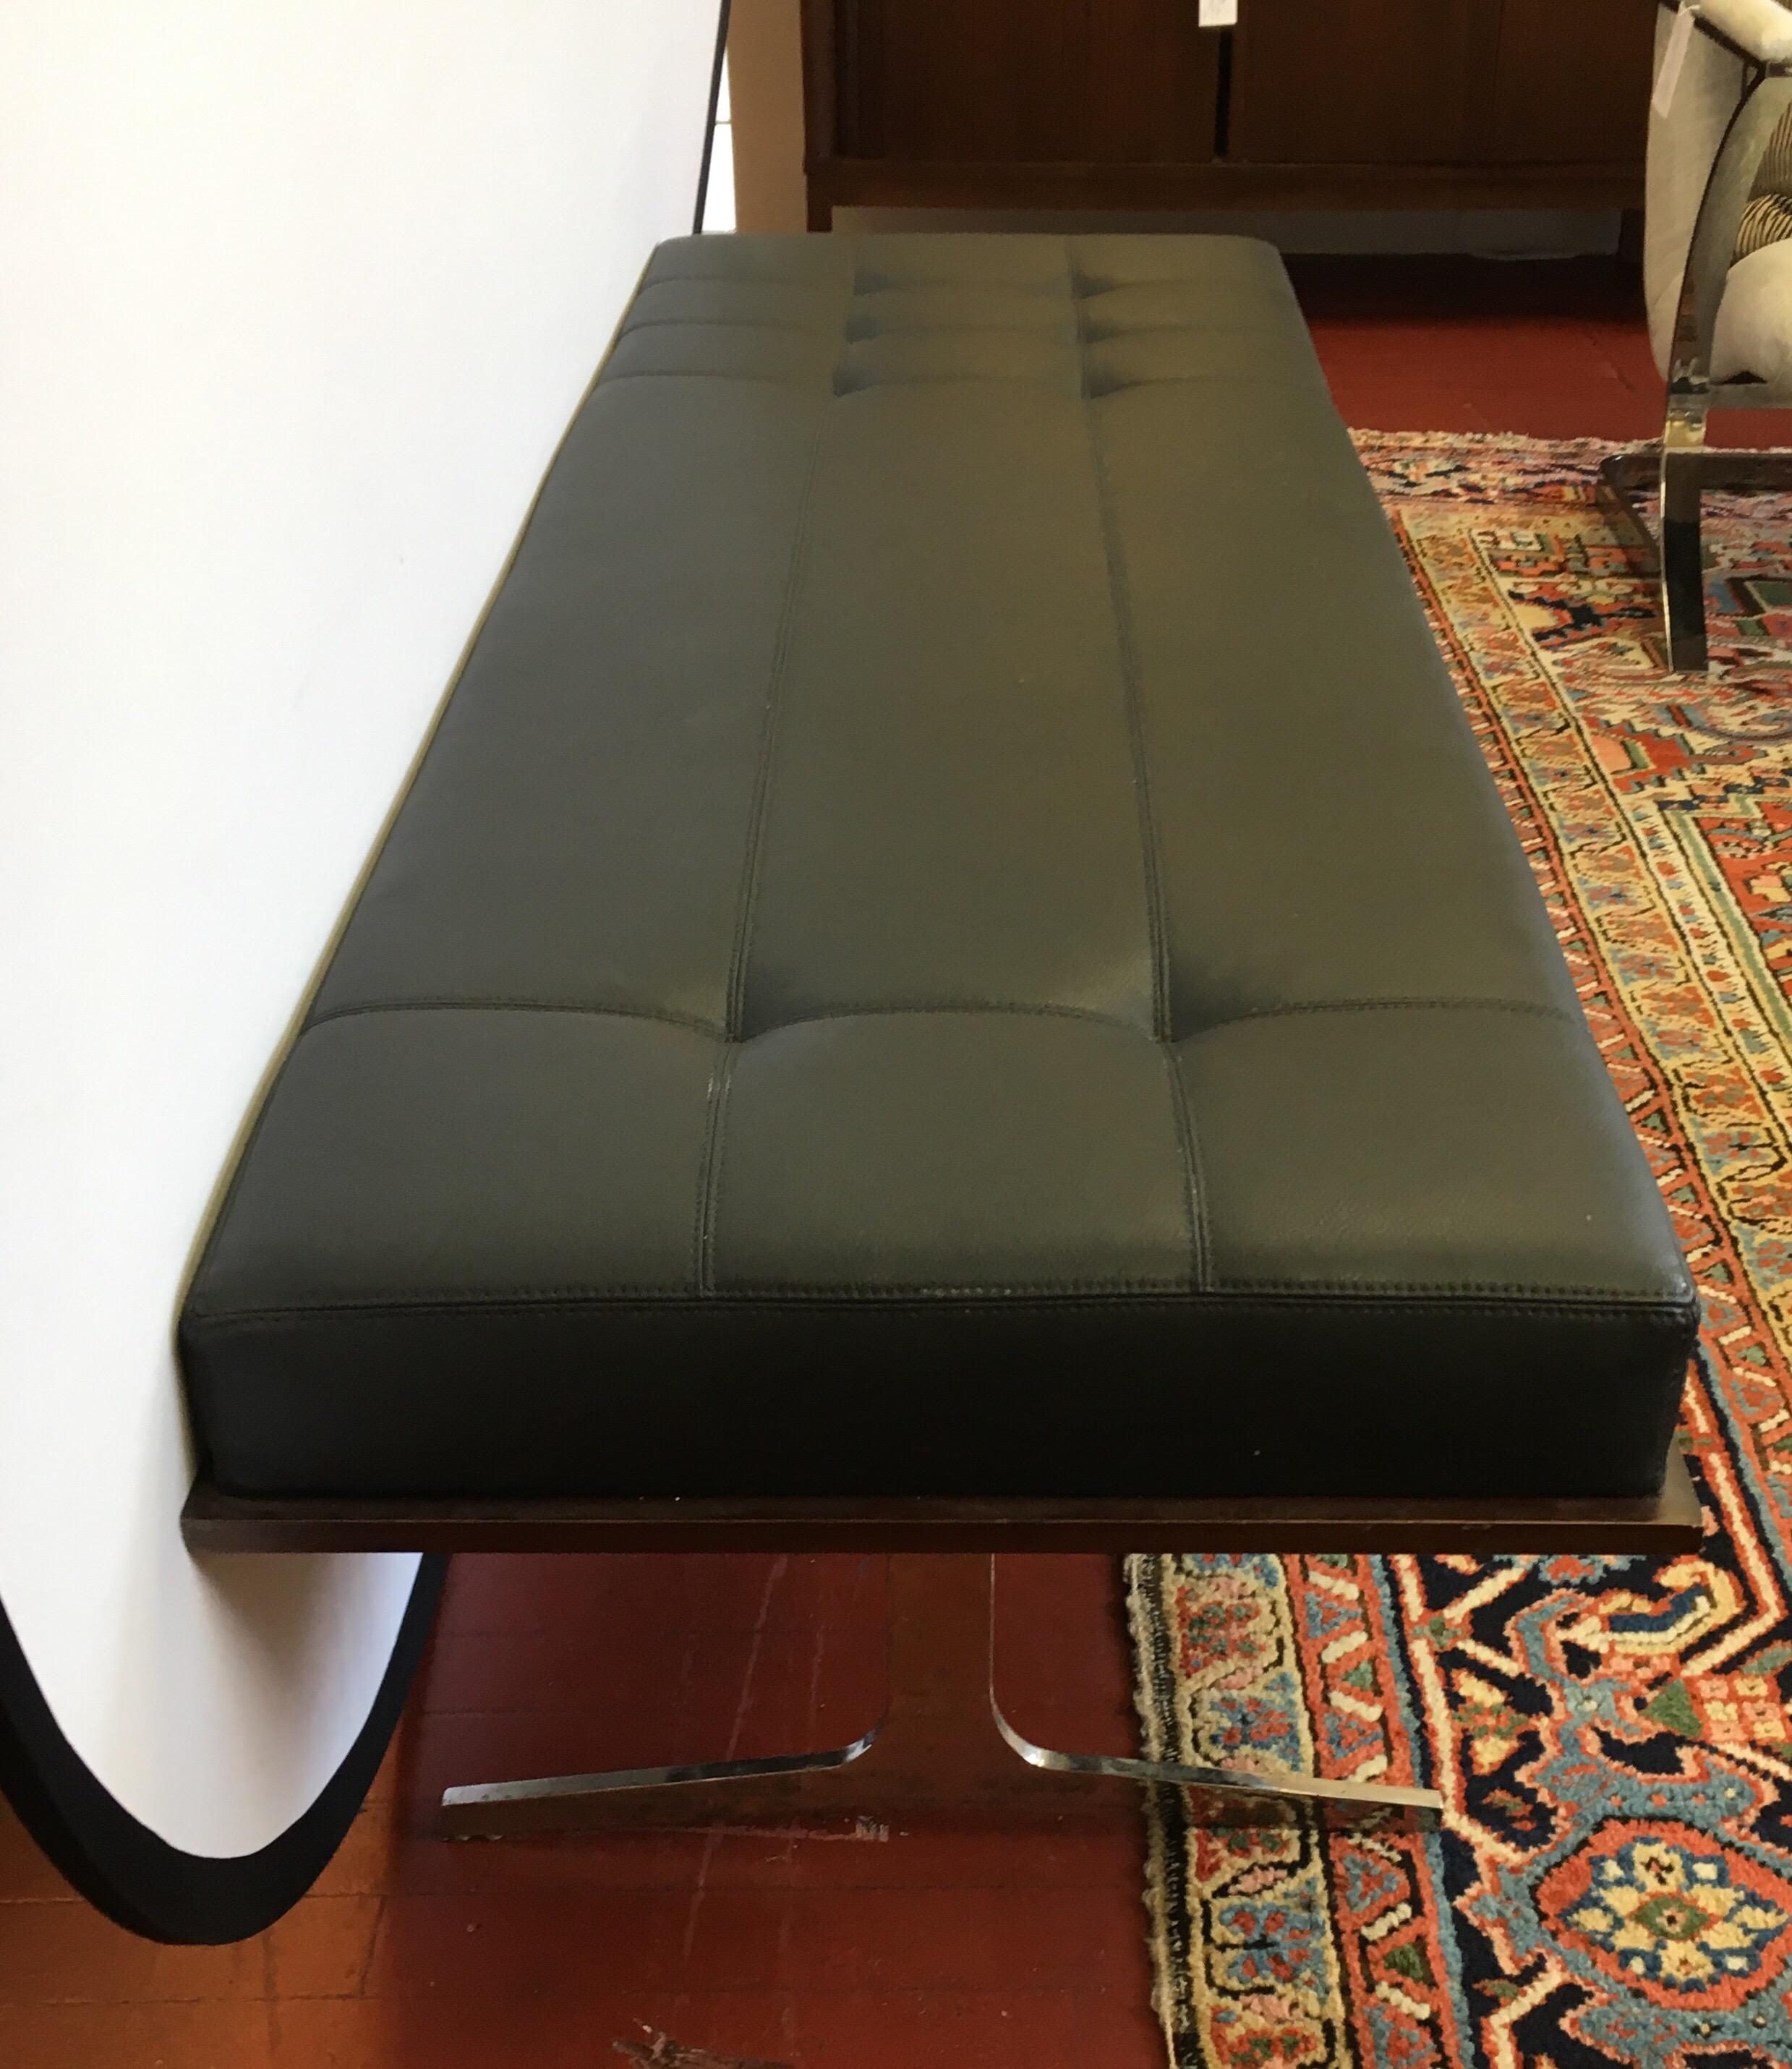 Bernhardt Black Leather and Mahogany Chaise Lounge Settee Lounger Daybed 3